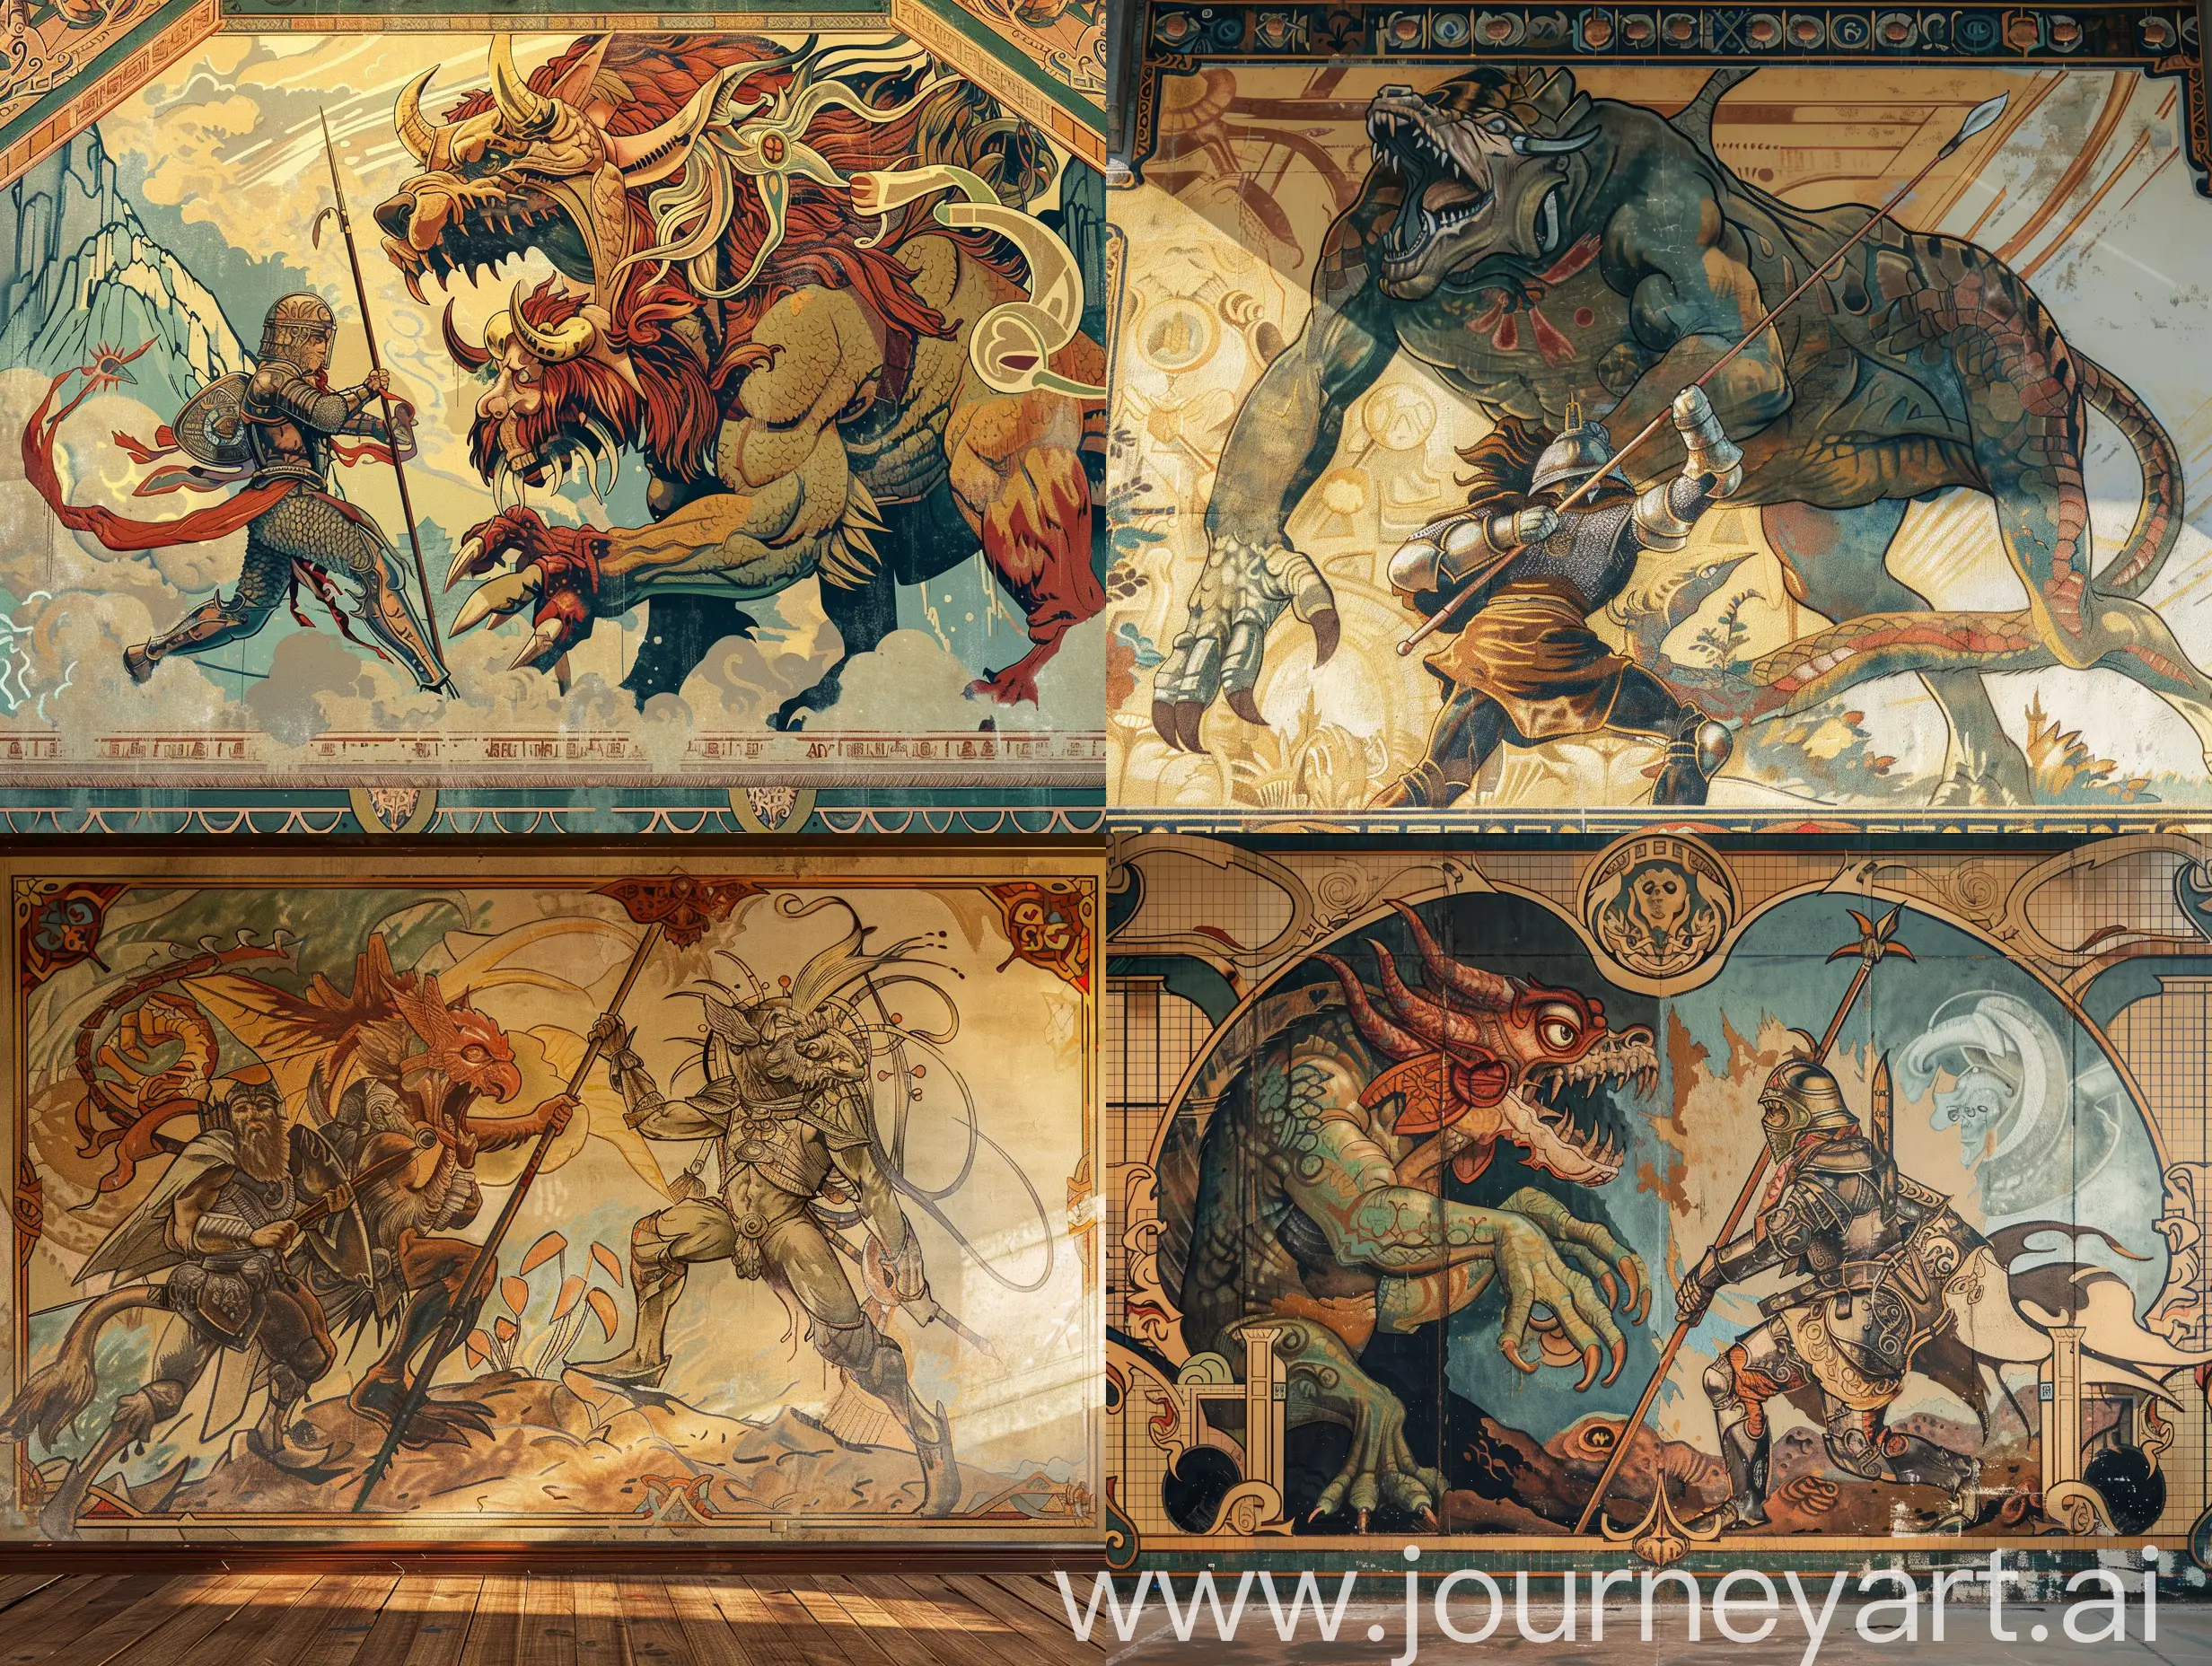 a mural on the wall depicting a battle scene of a warrior in armor with a spear against a two-headed huge scary monster. the mural on the wall. art nouveau style, Alphonse mucha style. fight, texture 8k.